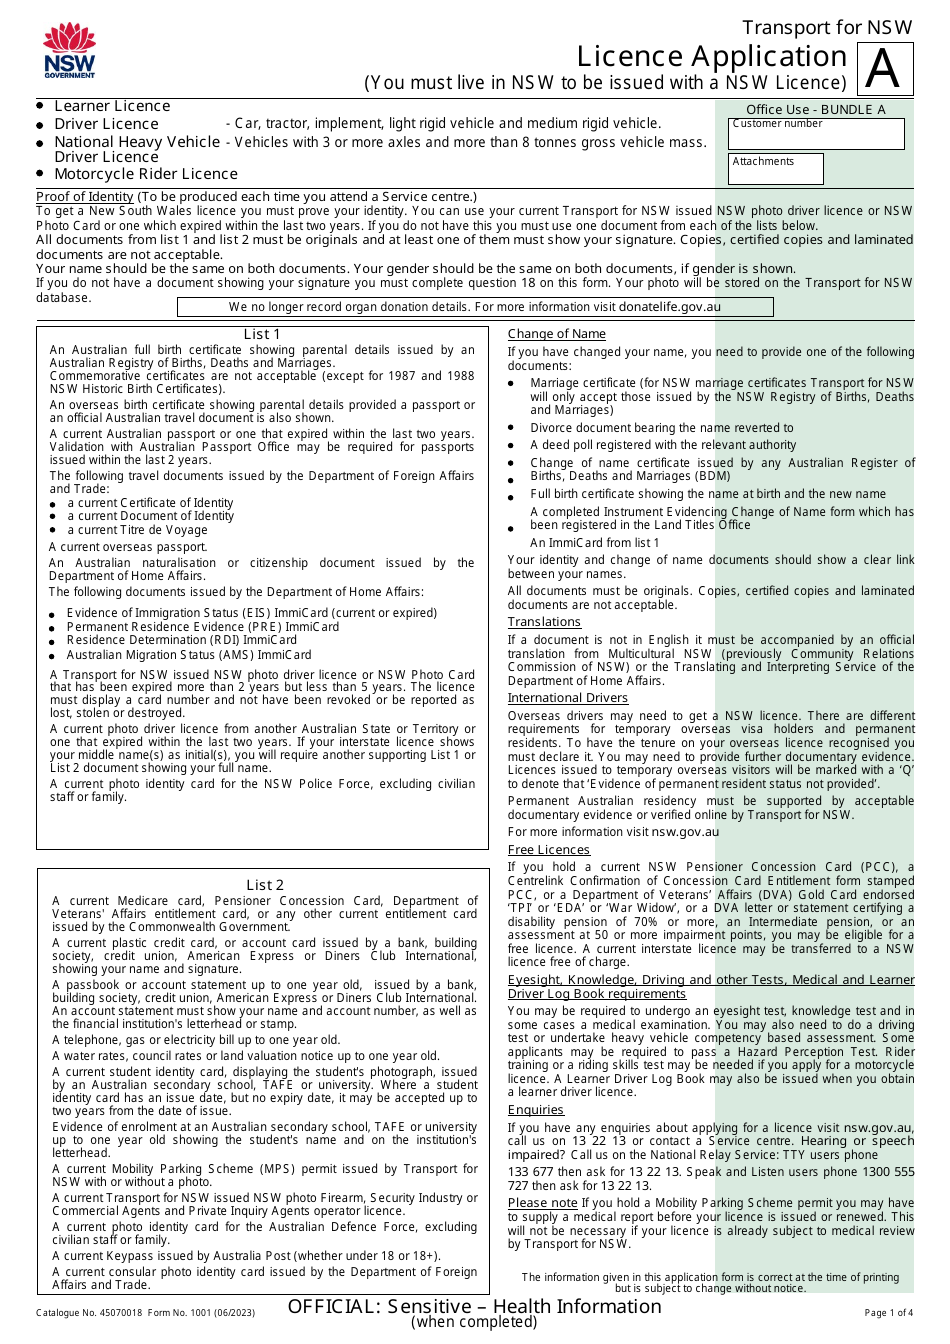 Form 1001 Transport for Nsw Licence Application - New South Wales, Australia, Page 1